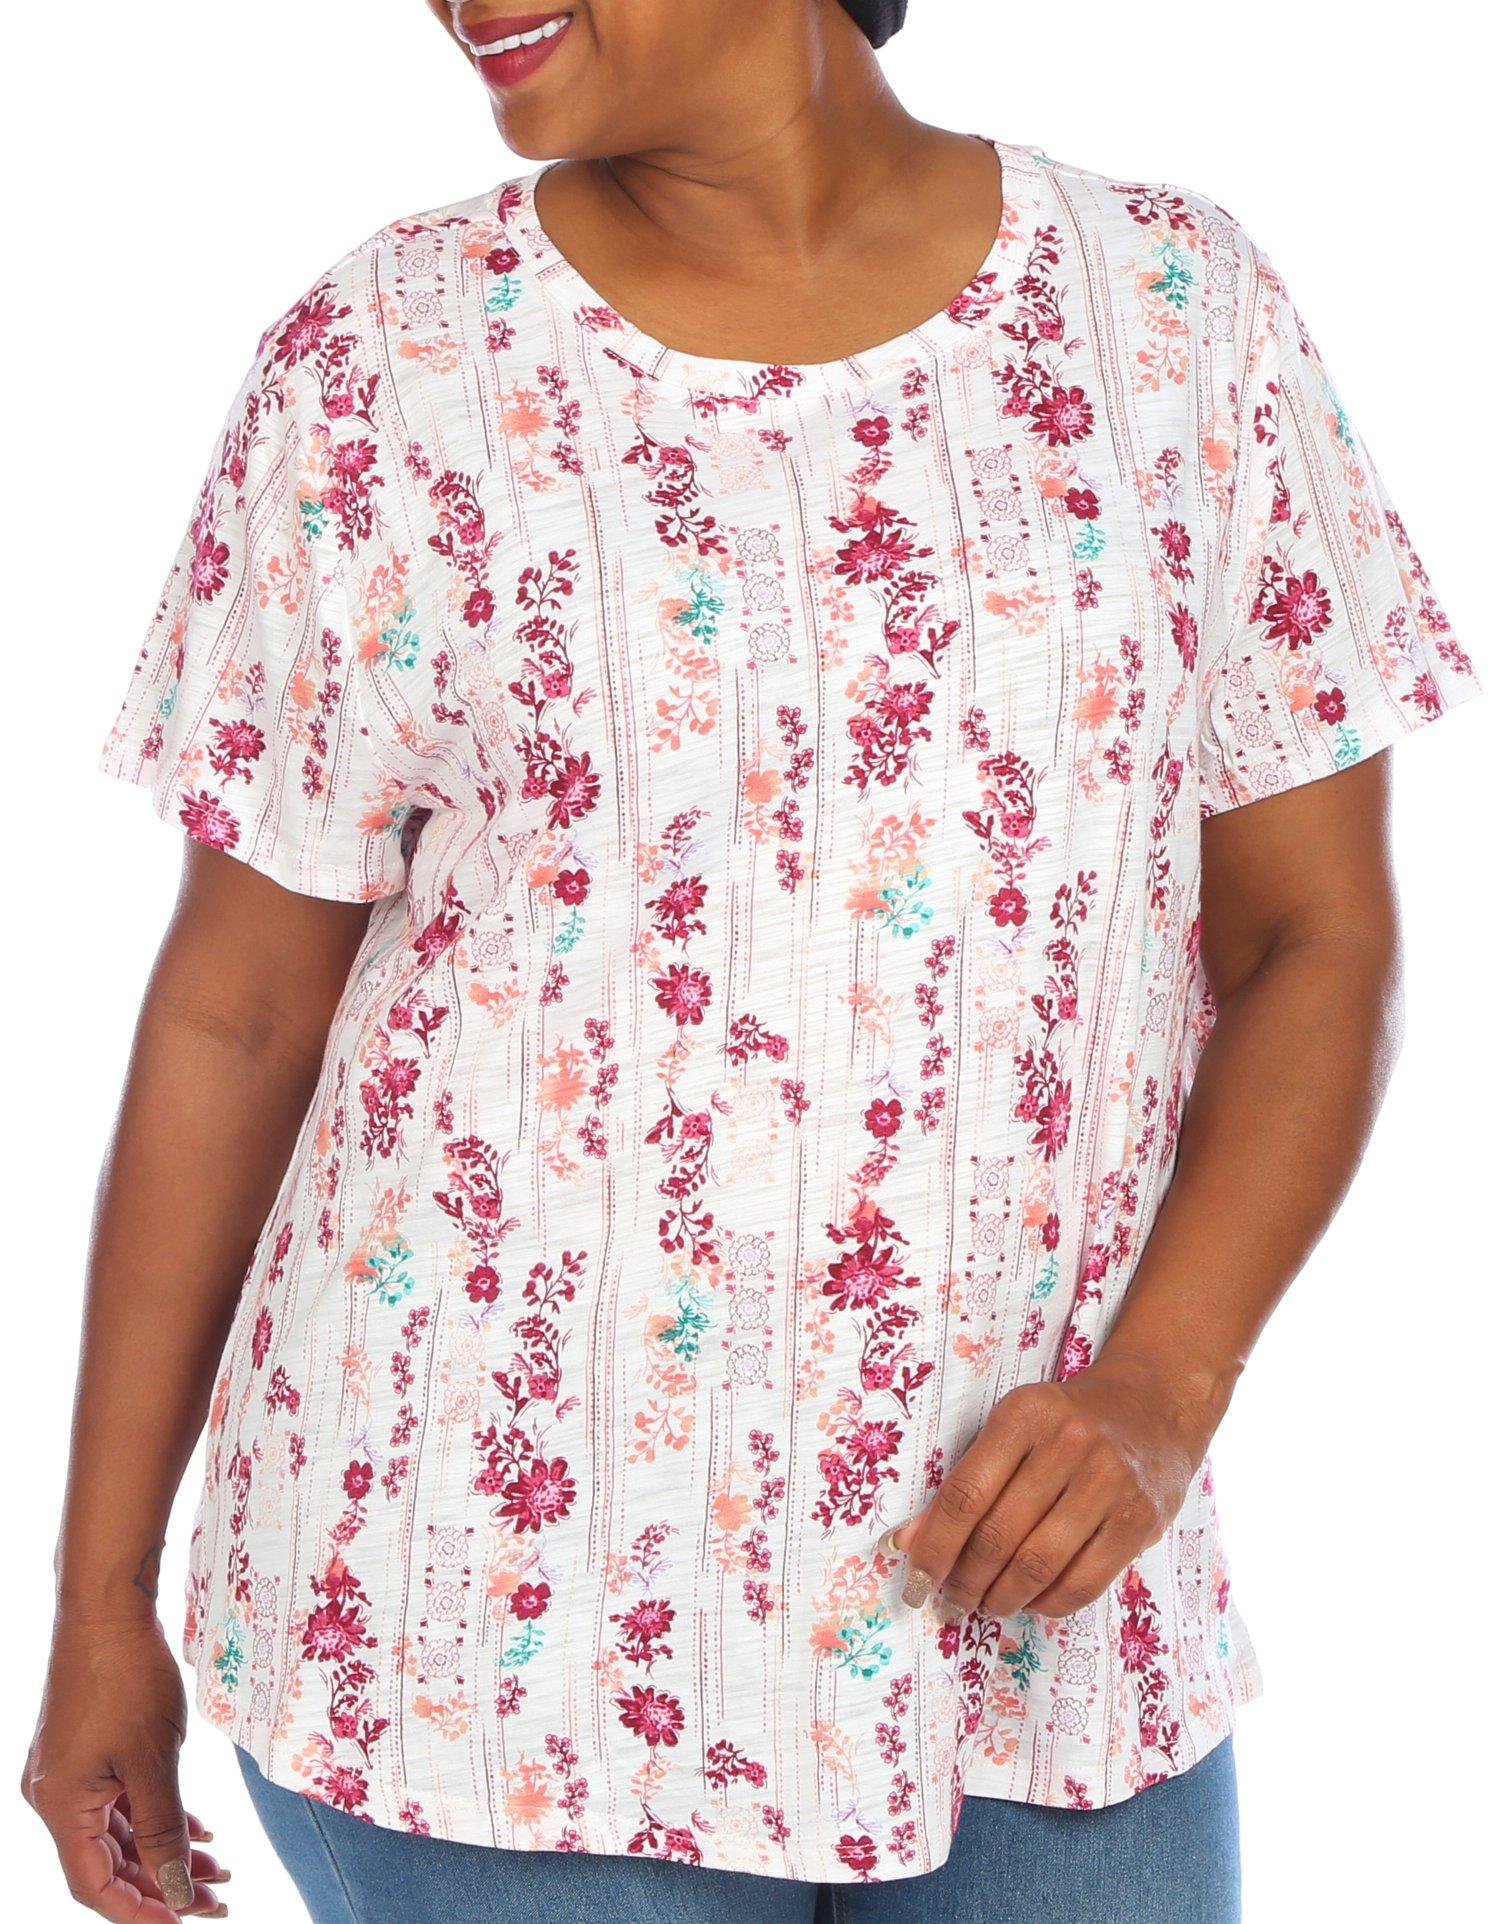 Blue Sol Plus Floral Panel Luxey Short Sleeve Tee